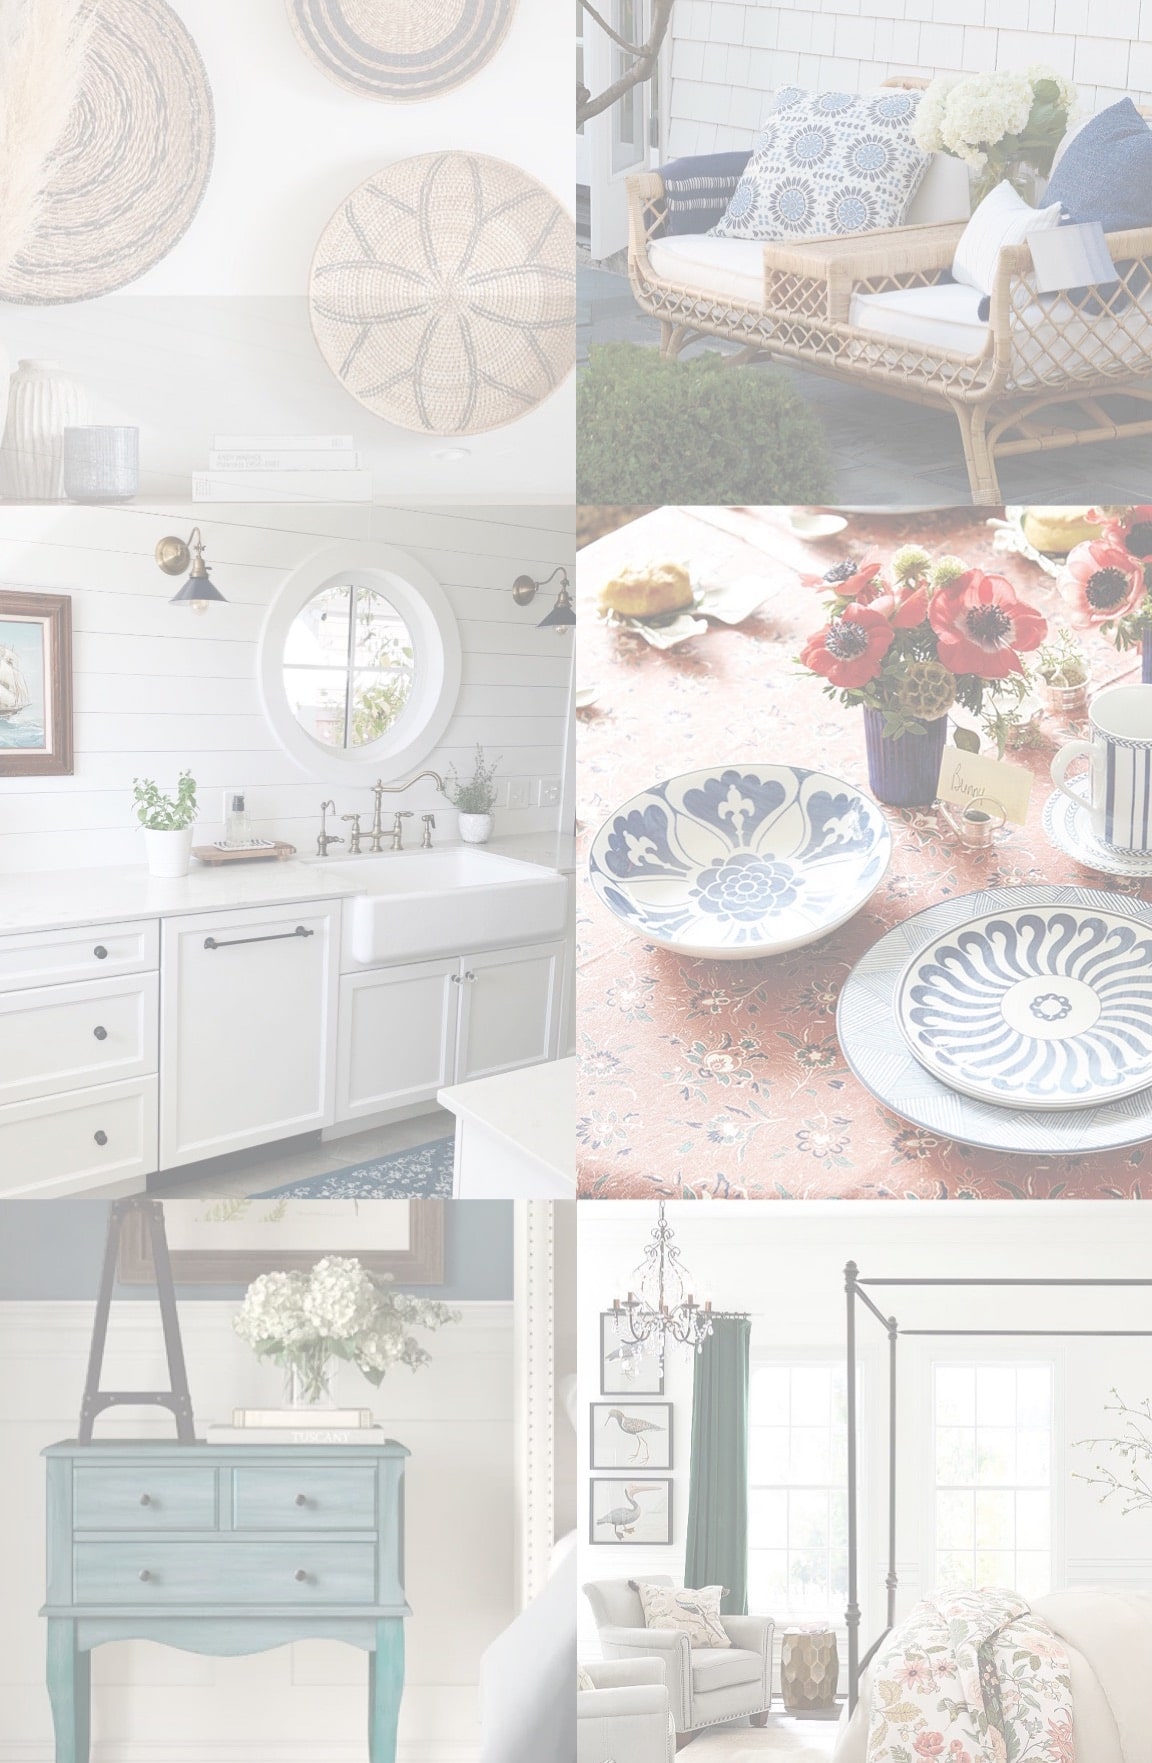 Introducing: The Inspired Room Style